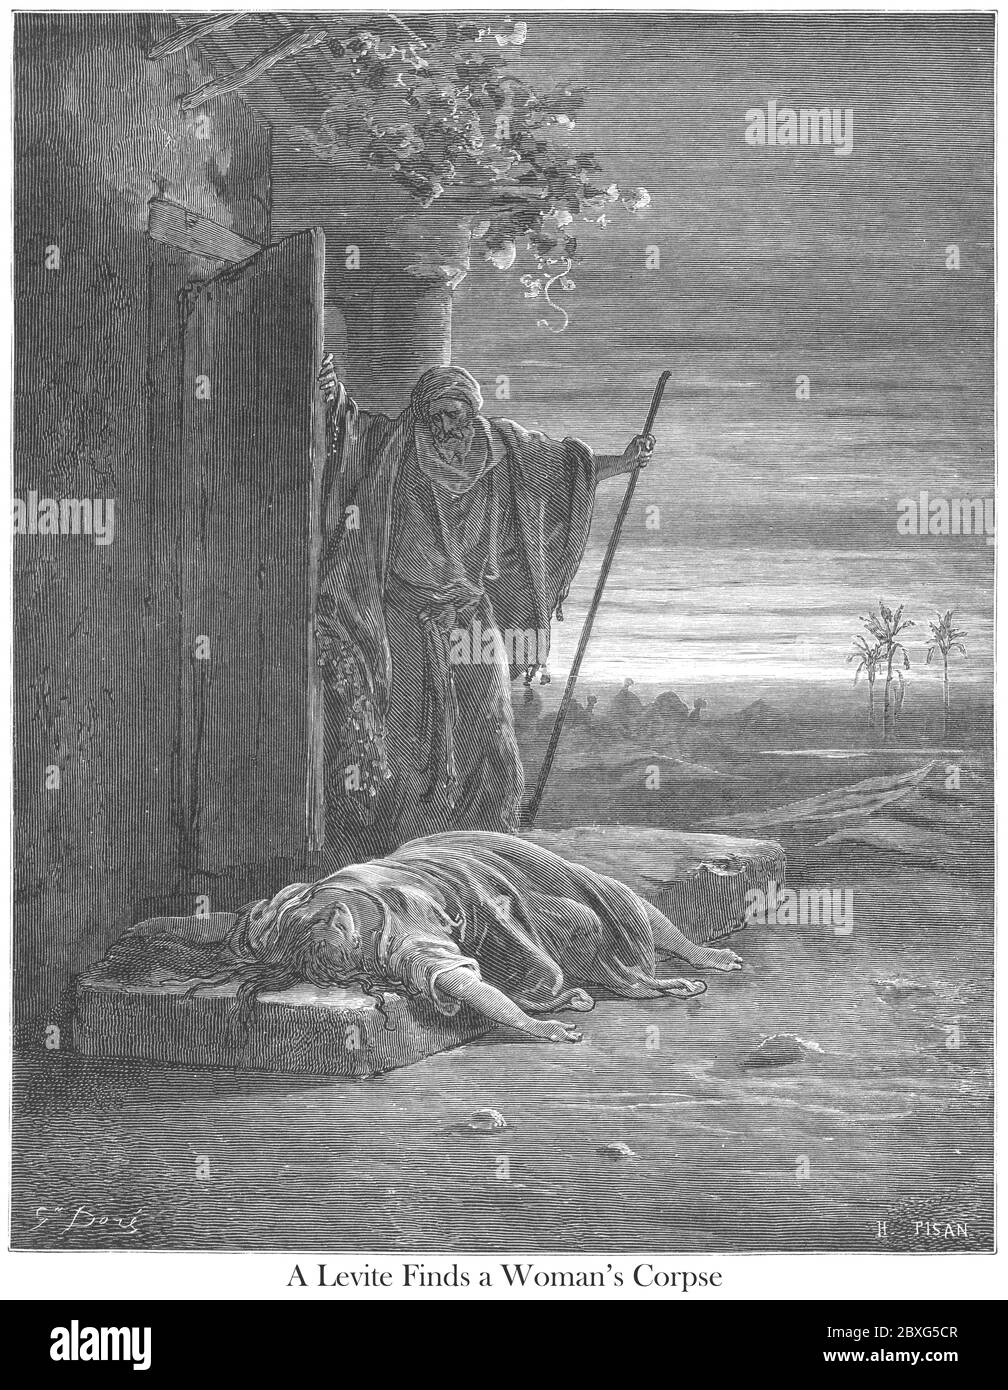 The Levite Finding the Corpse of his Woman Judges 19:25-27 From the book 'Bible Gallery' Illustrated by Gustave Dore with Memoir of Dore and Descriptive Letter-press by Talbot W. Chambers D.D. Published by Cassell & Company Limited in London and simultaneously by Mame in Tours, France in 1866 Stock Photo